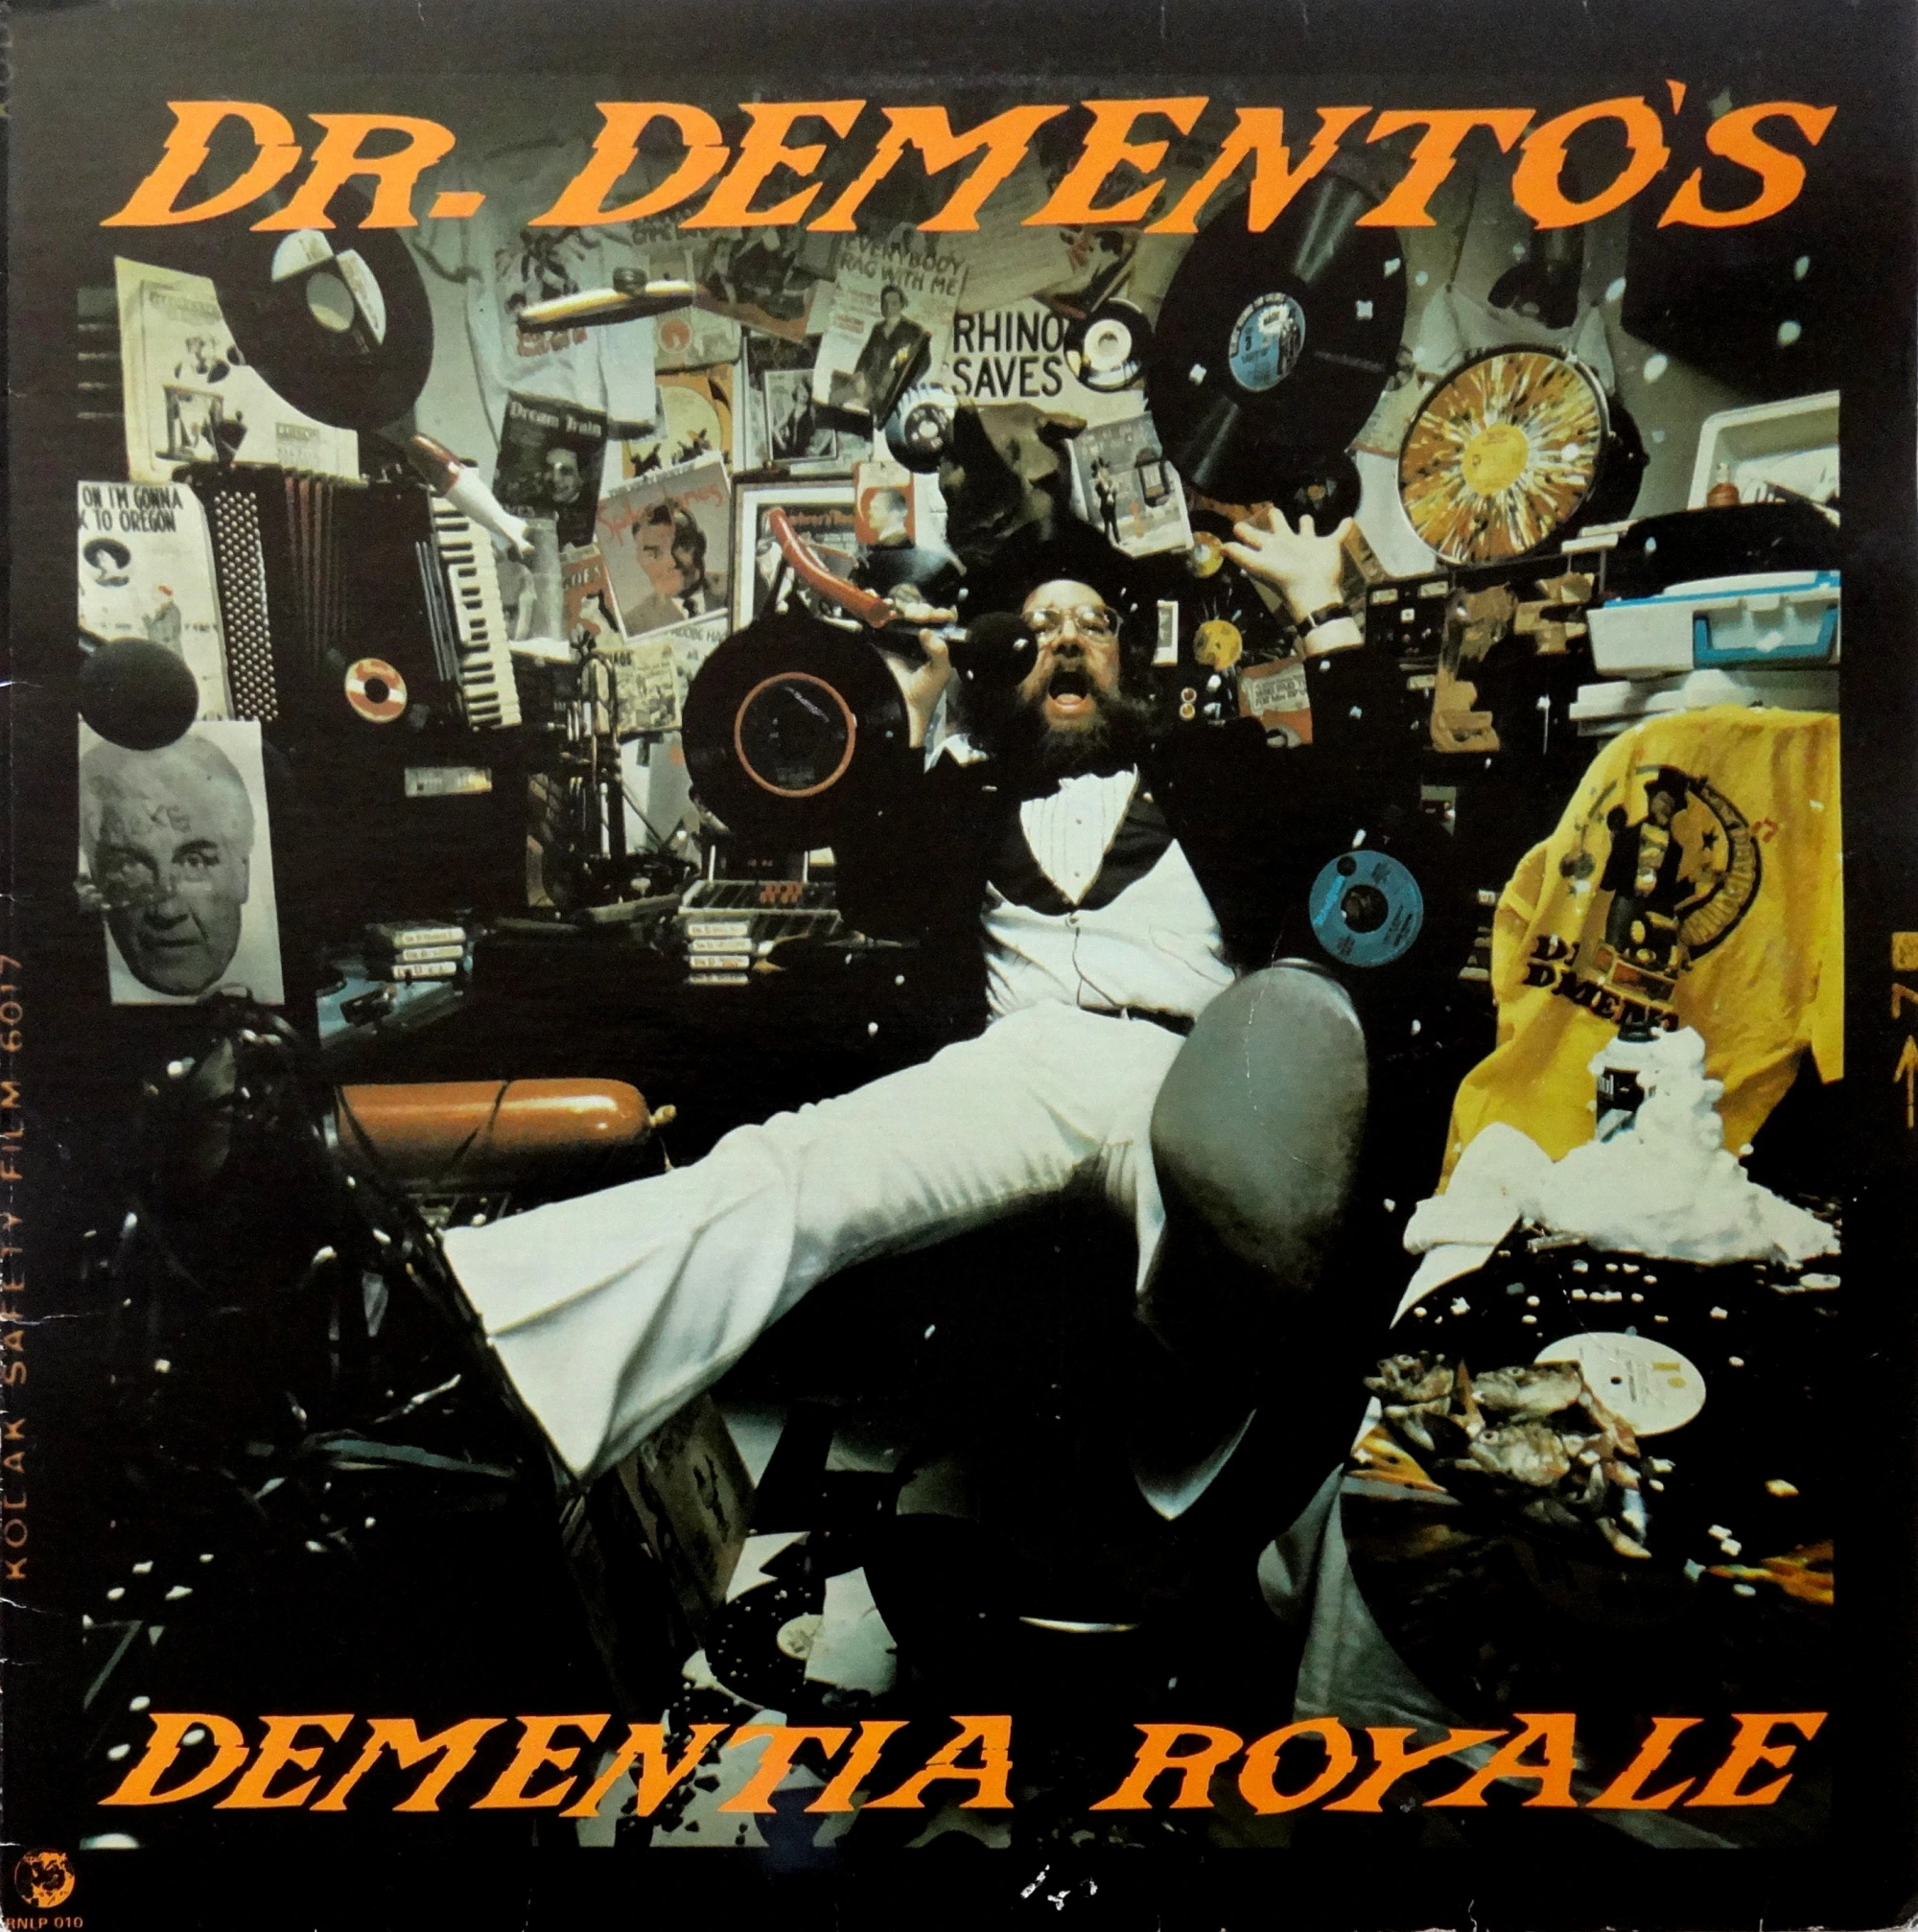 Cover of Dr Demento's Dementia Royale